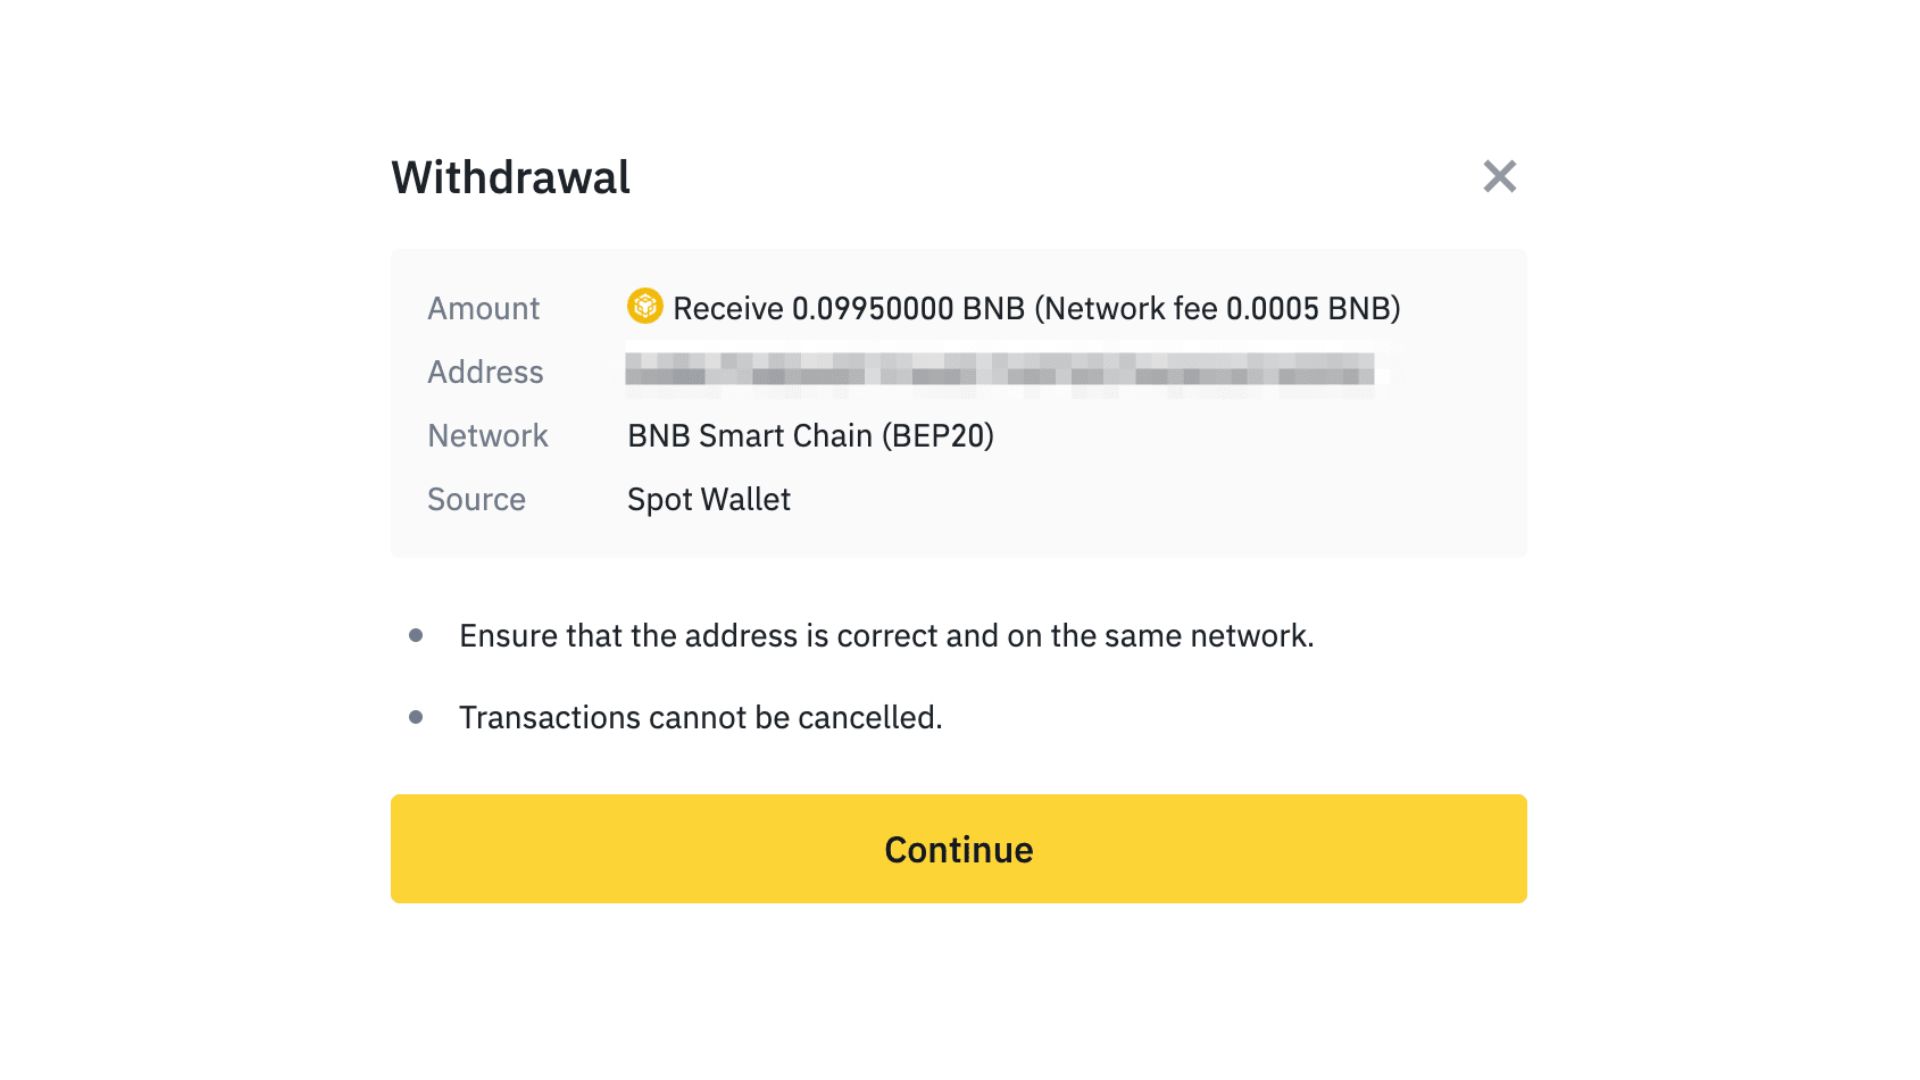 Specifying the Withdrawal Amount.